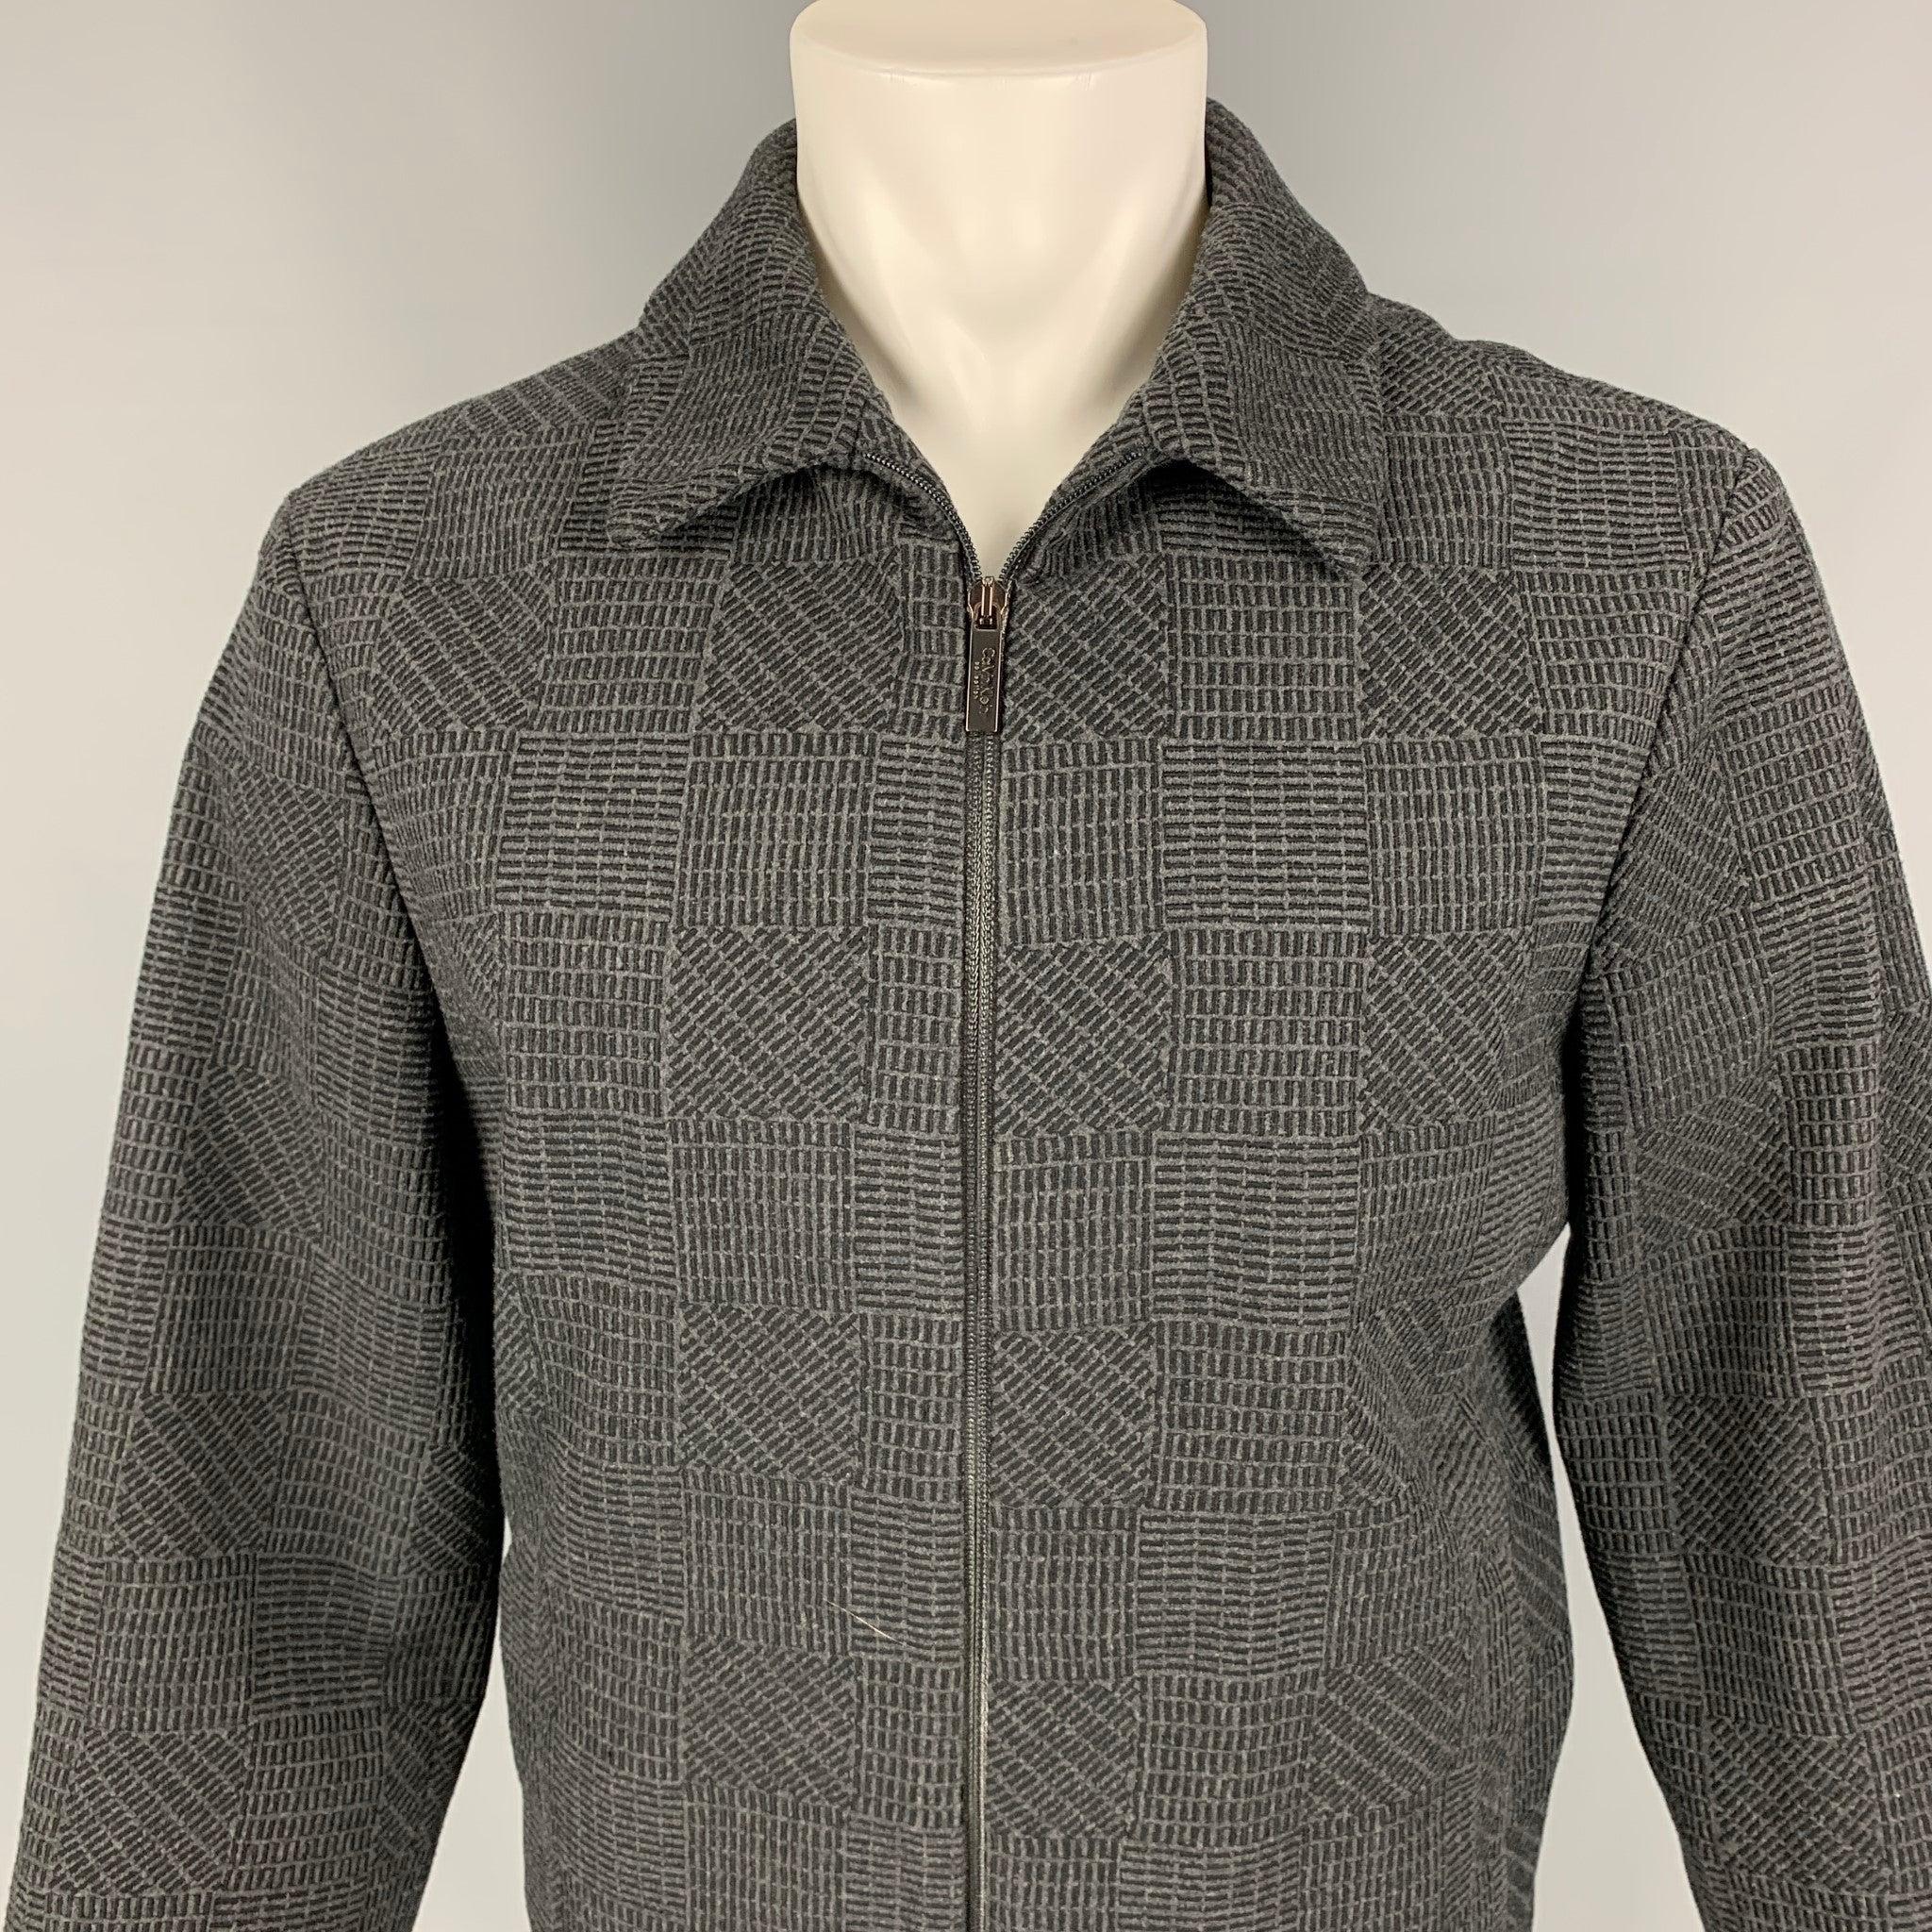 CALVIN KLEIN COLLECTION jacket comes in a charcoal & black textured wool / cashmere with a full liner featuring a spread collar, slit pockets, and a full zip up closure. Made in Italy.
 Excellent
 Pre-Owned Condition.  
 

 Marked:  48 
 

